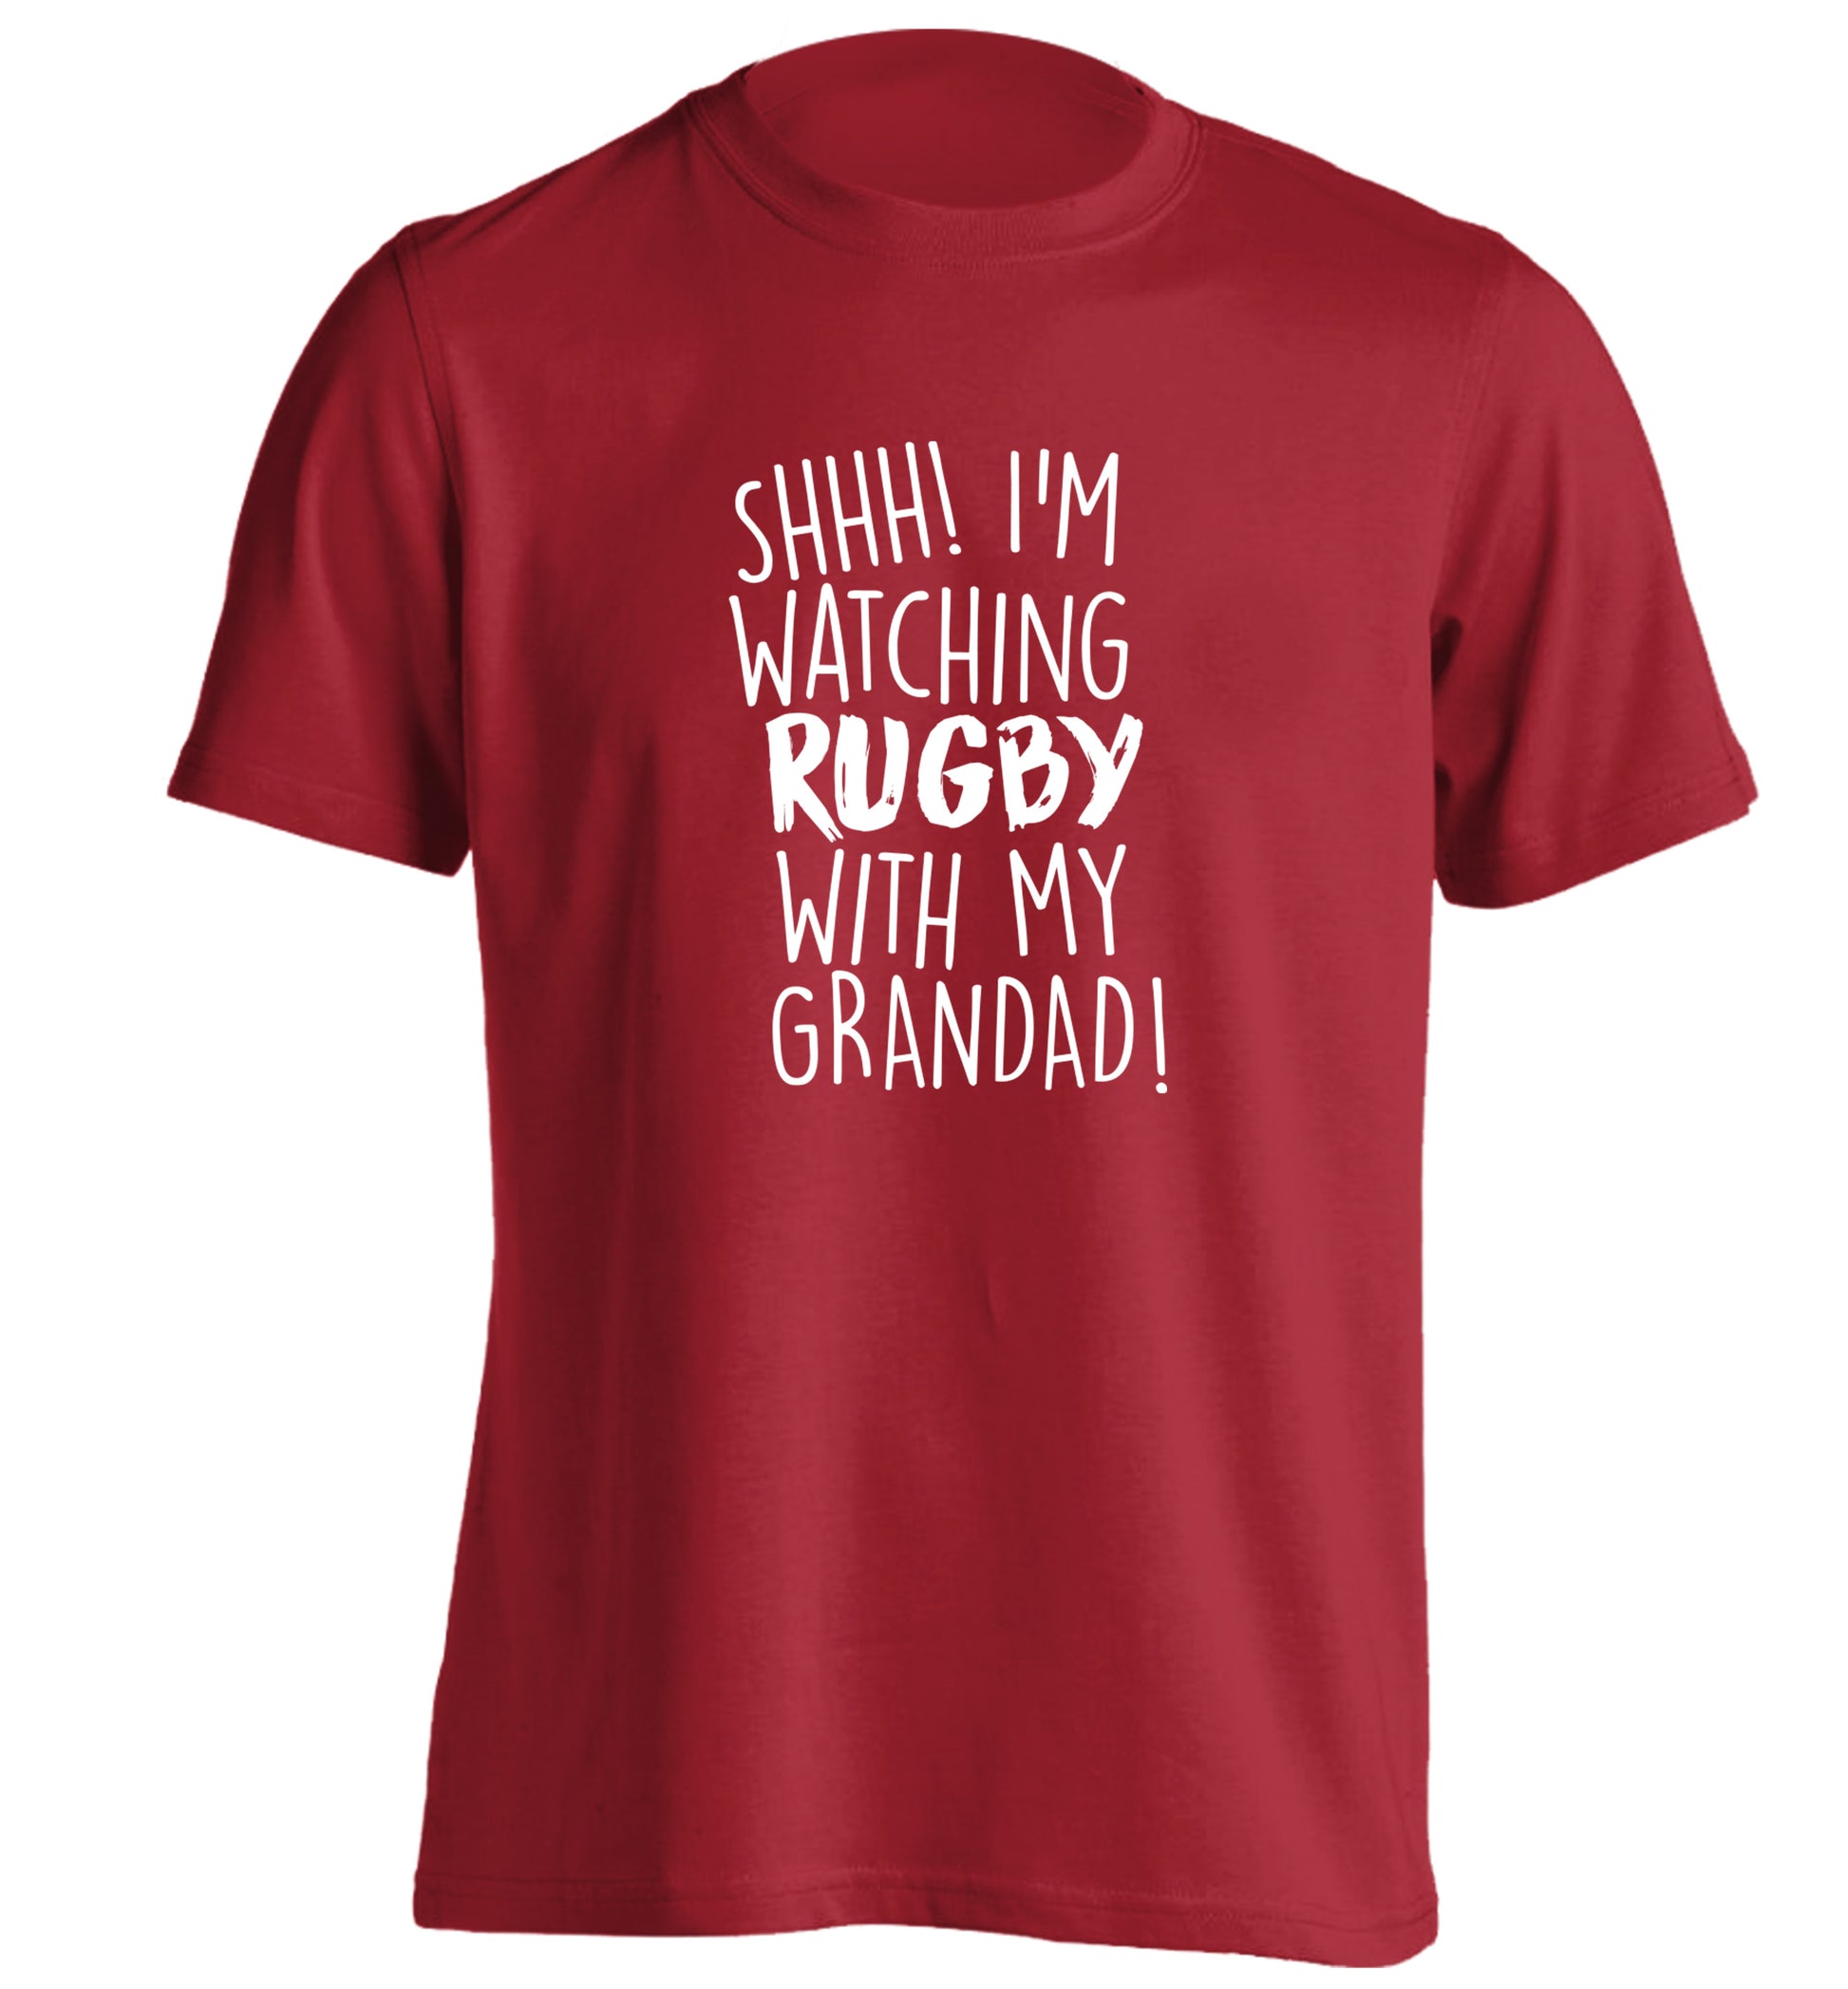 Shh I'm watching rugby with my grandad adults unisex red Tshirt 2XL